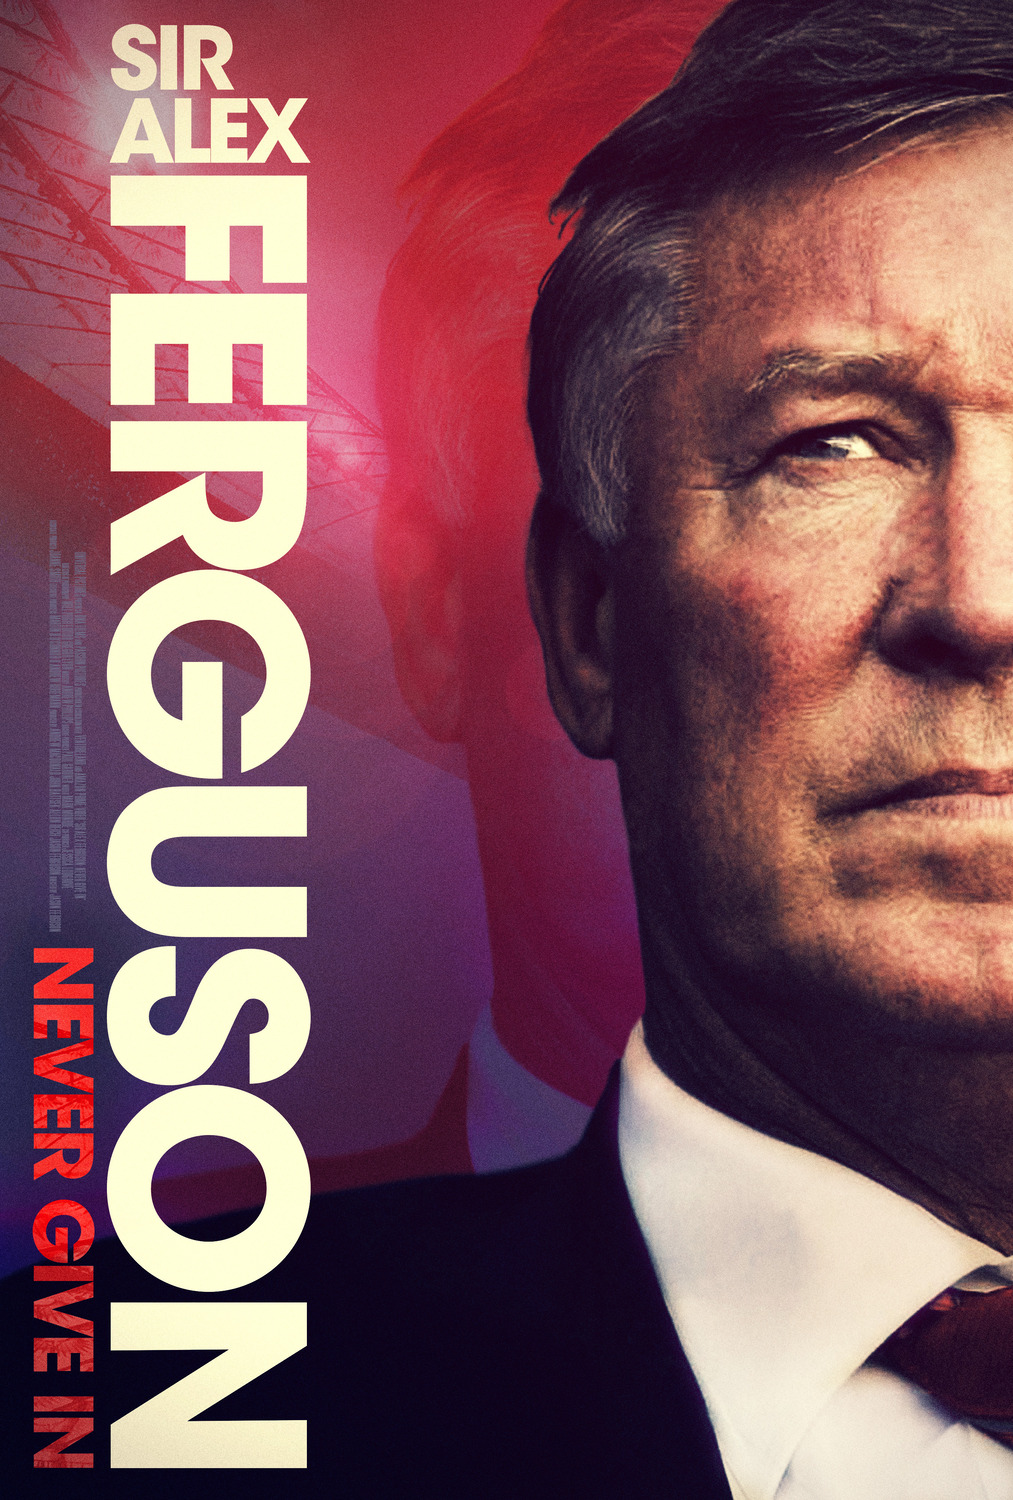 Extra Large Movie Poster Image for Sir Alex Ferguson: Never Give In 